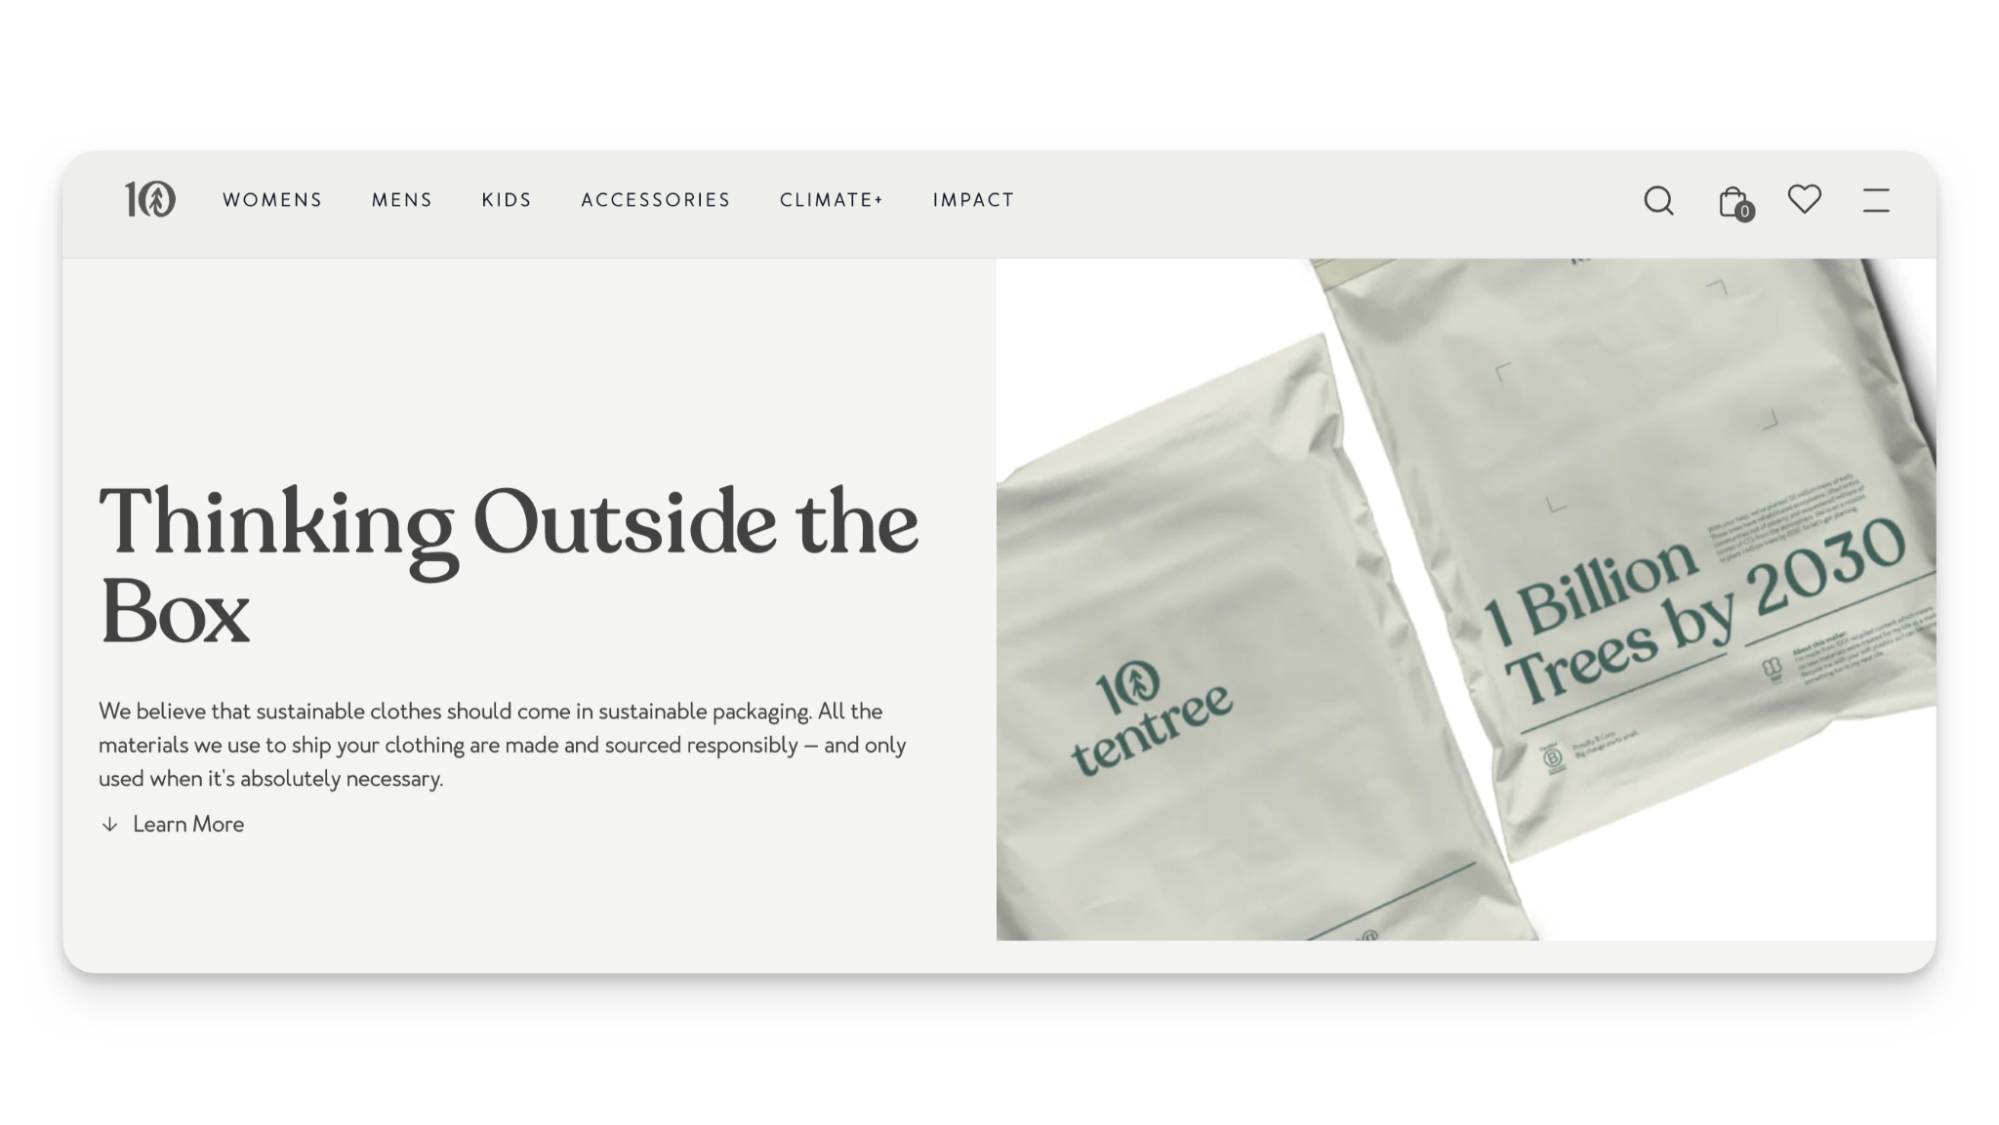 Image of outdoor apparel company Tentree’s website home page